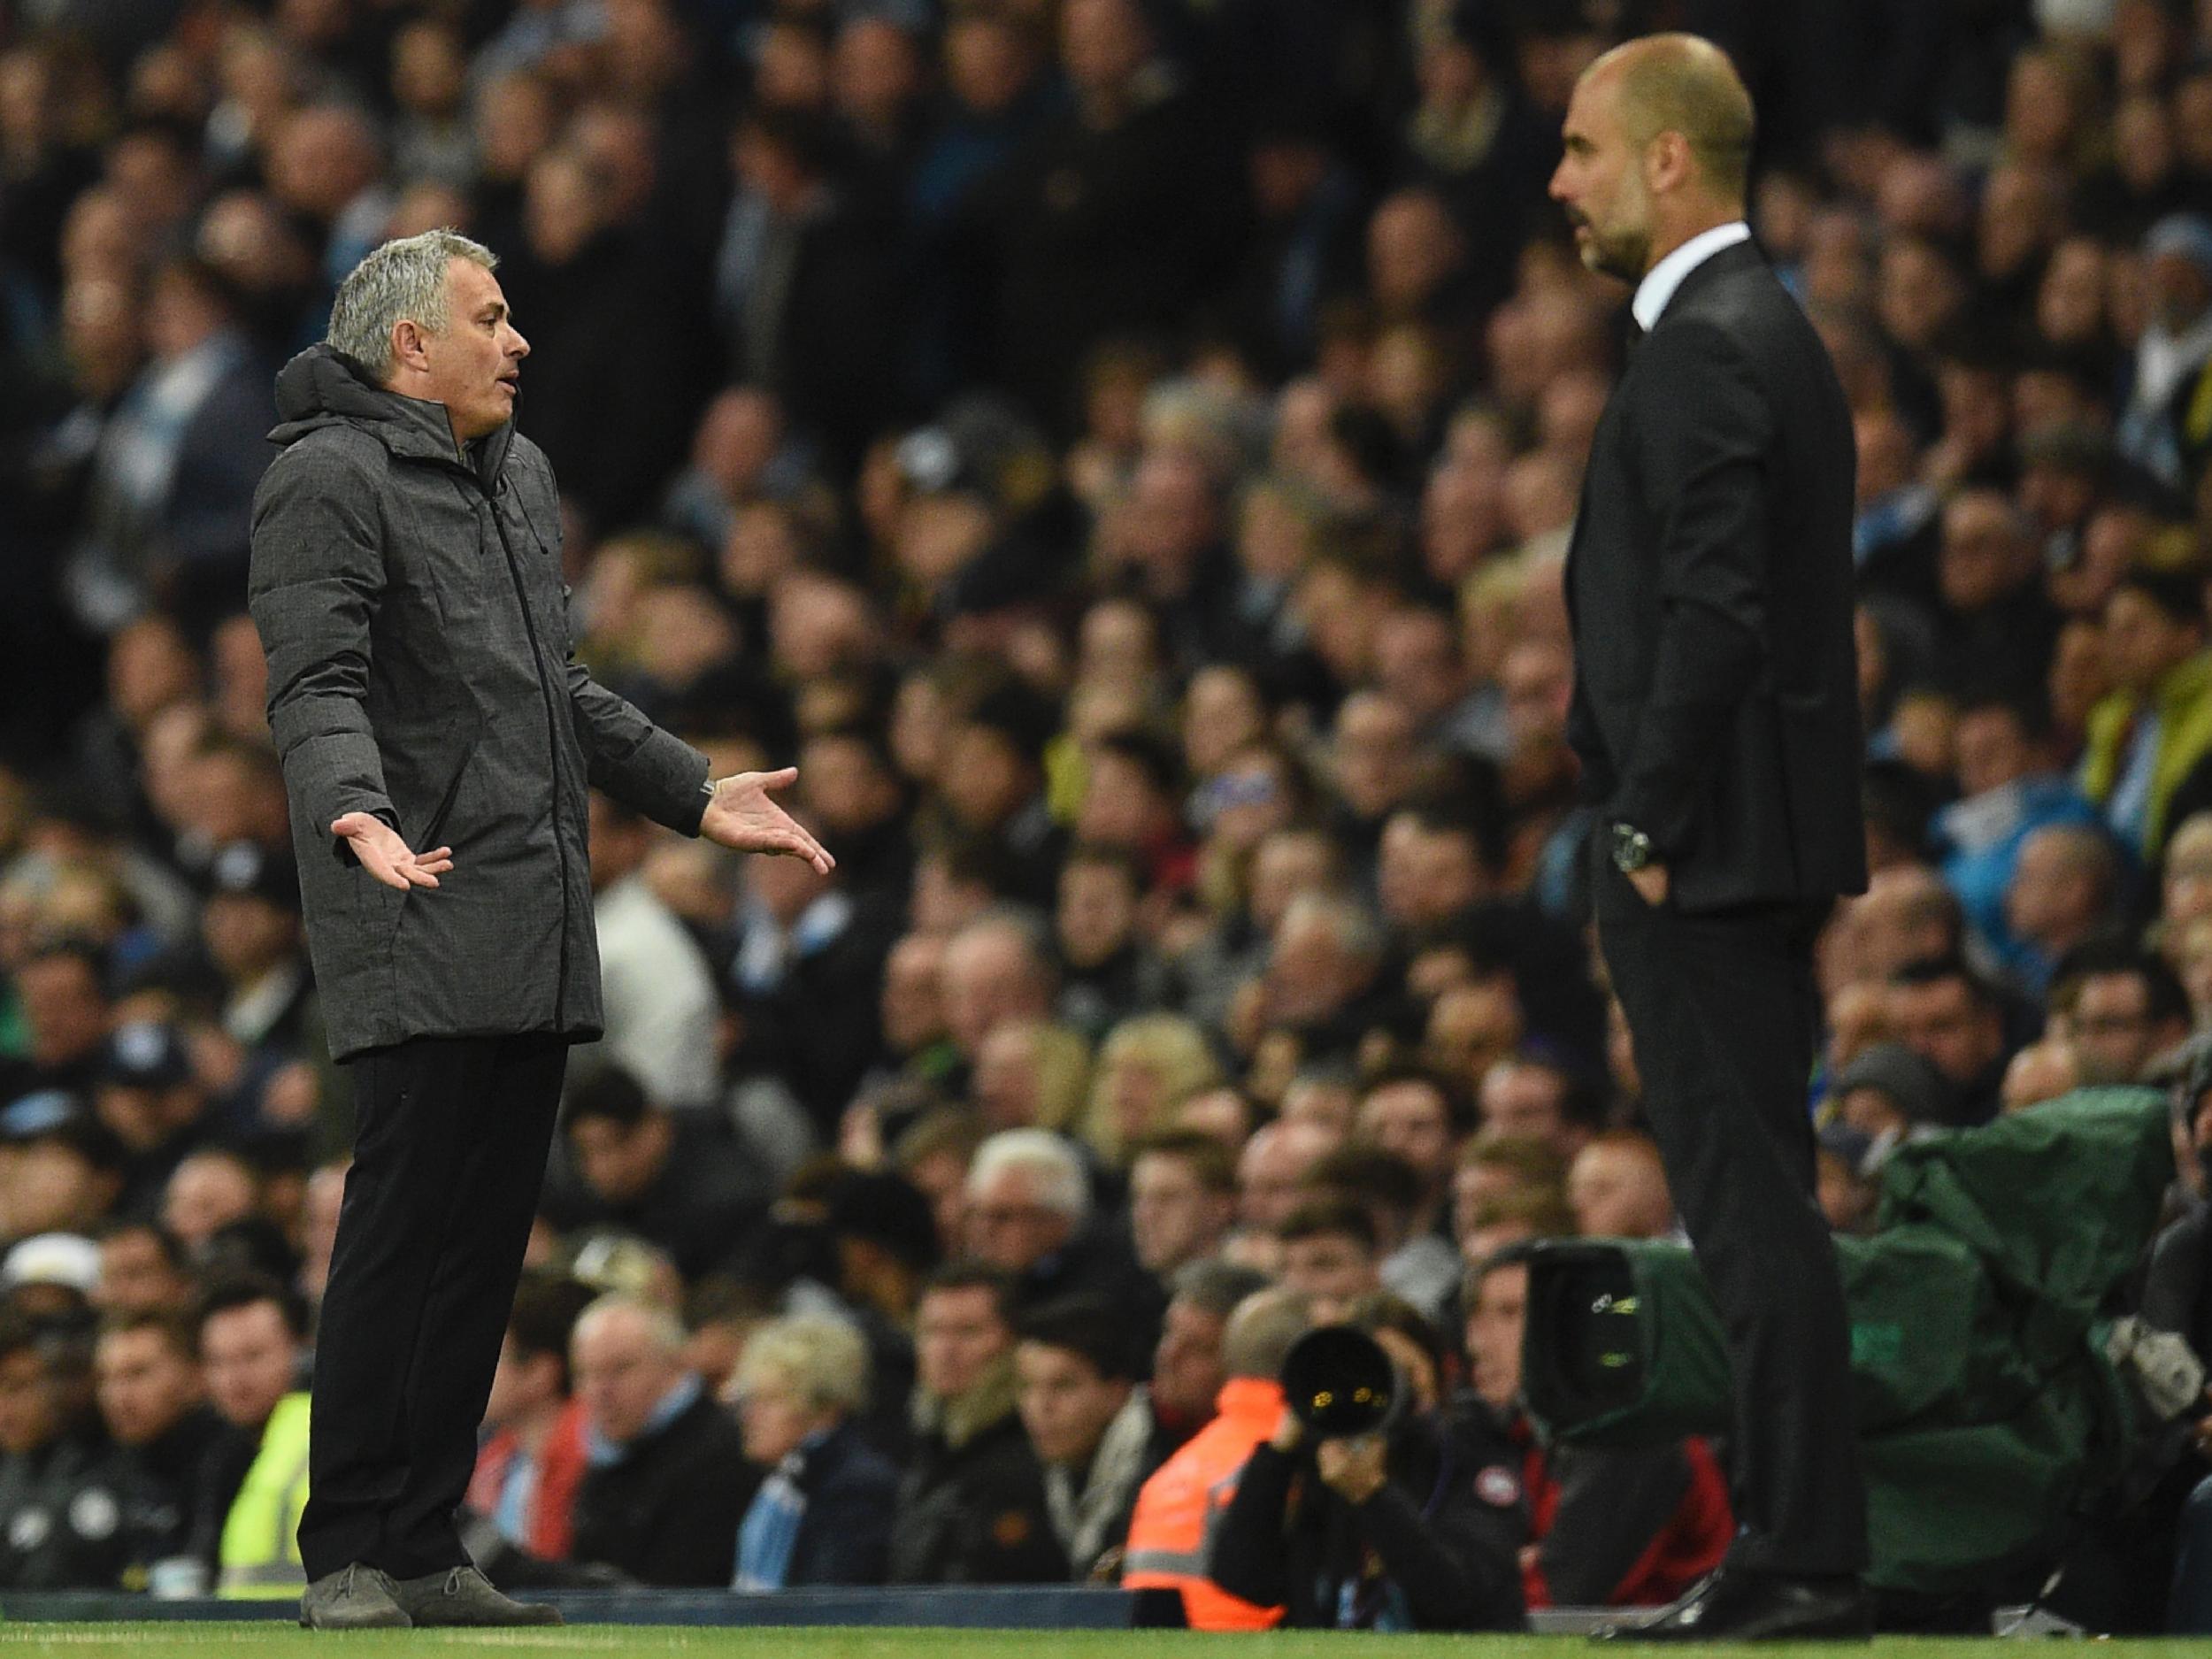 Mourinho and Guardiola both had to settle for a draw